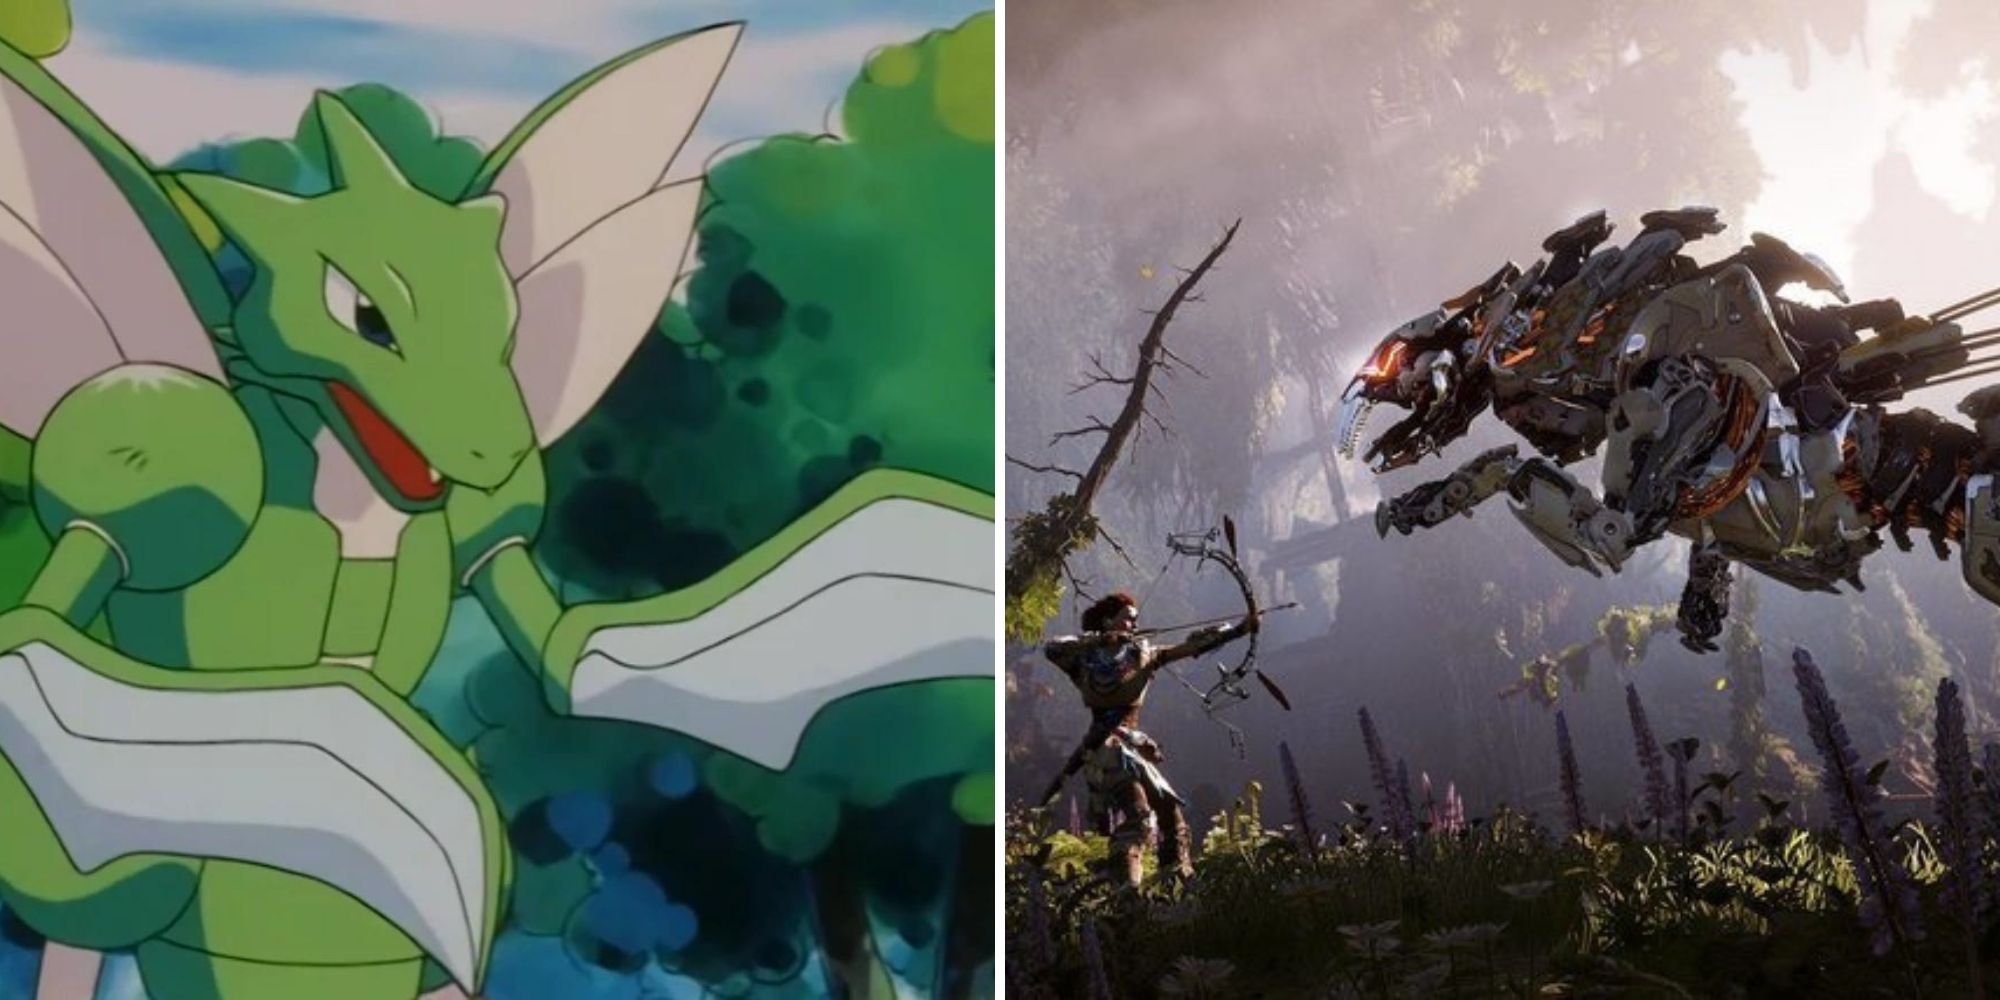 Split Image the Pokemon Scyther in woodland and Aloy from Horizon battling a Ravager